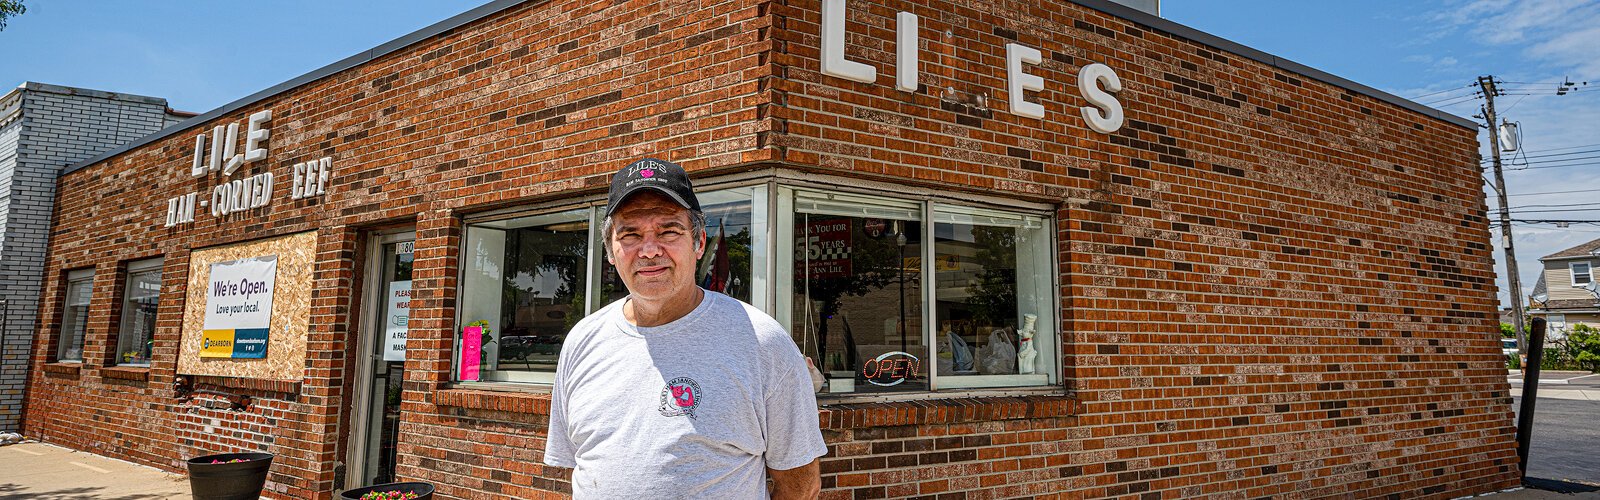 Harry Lile, owner of Lile's Sandwich shop in Dearborn. Photo by Doug Coombe.